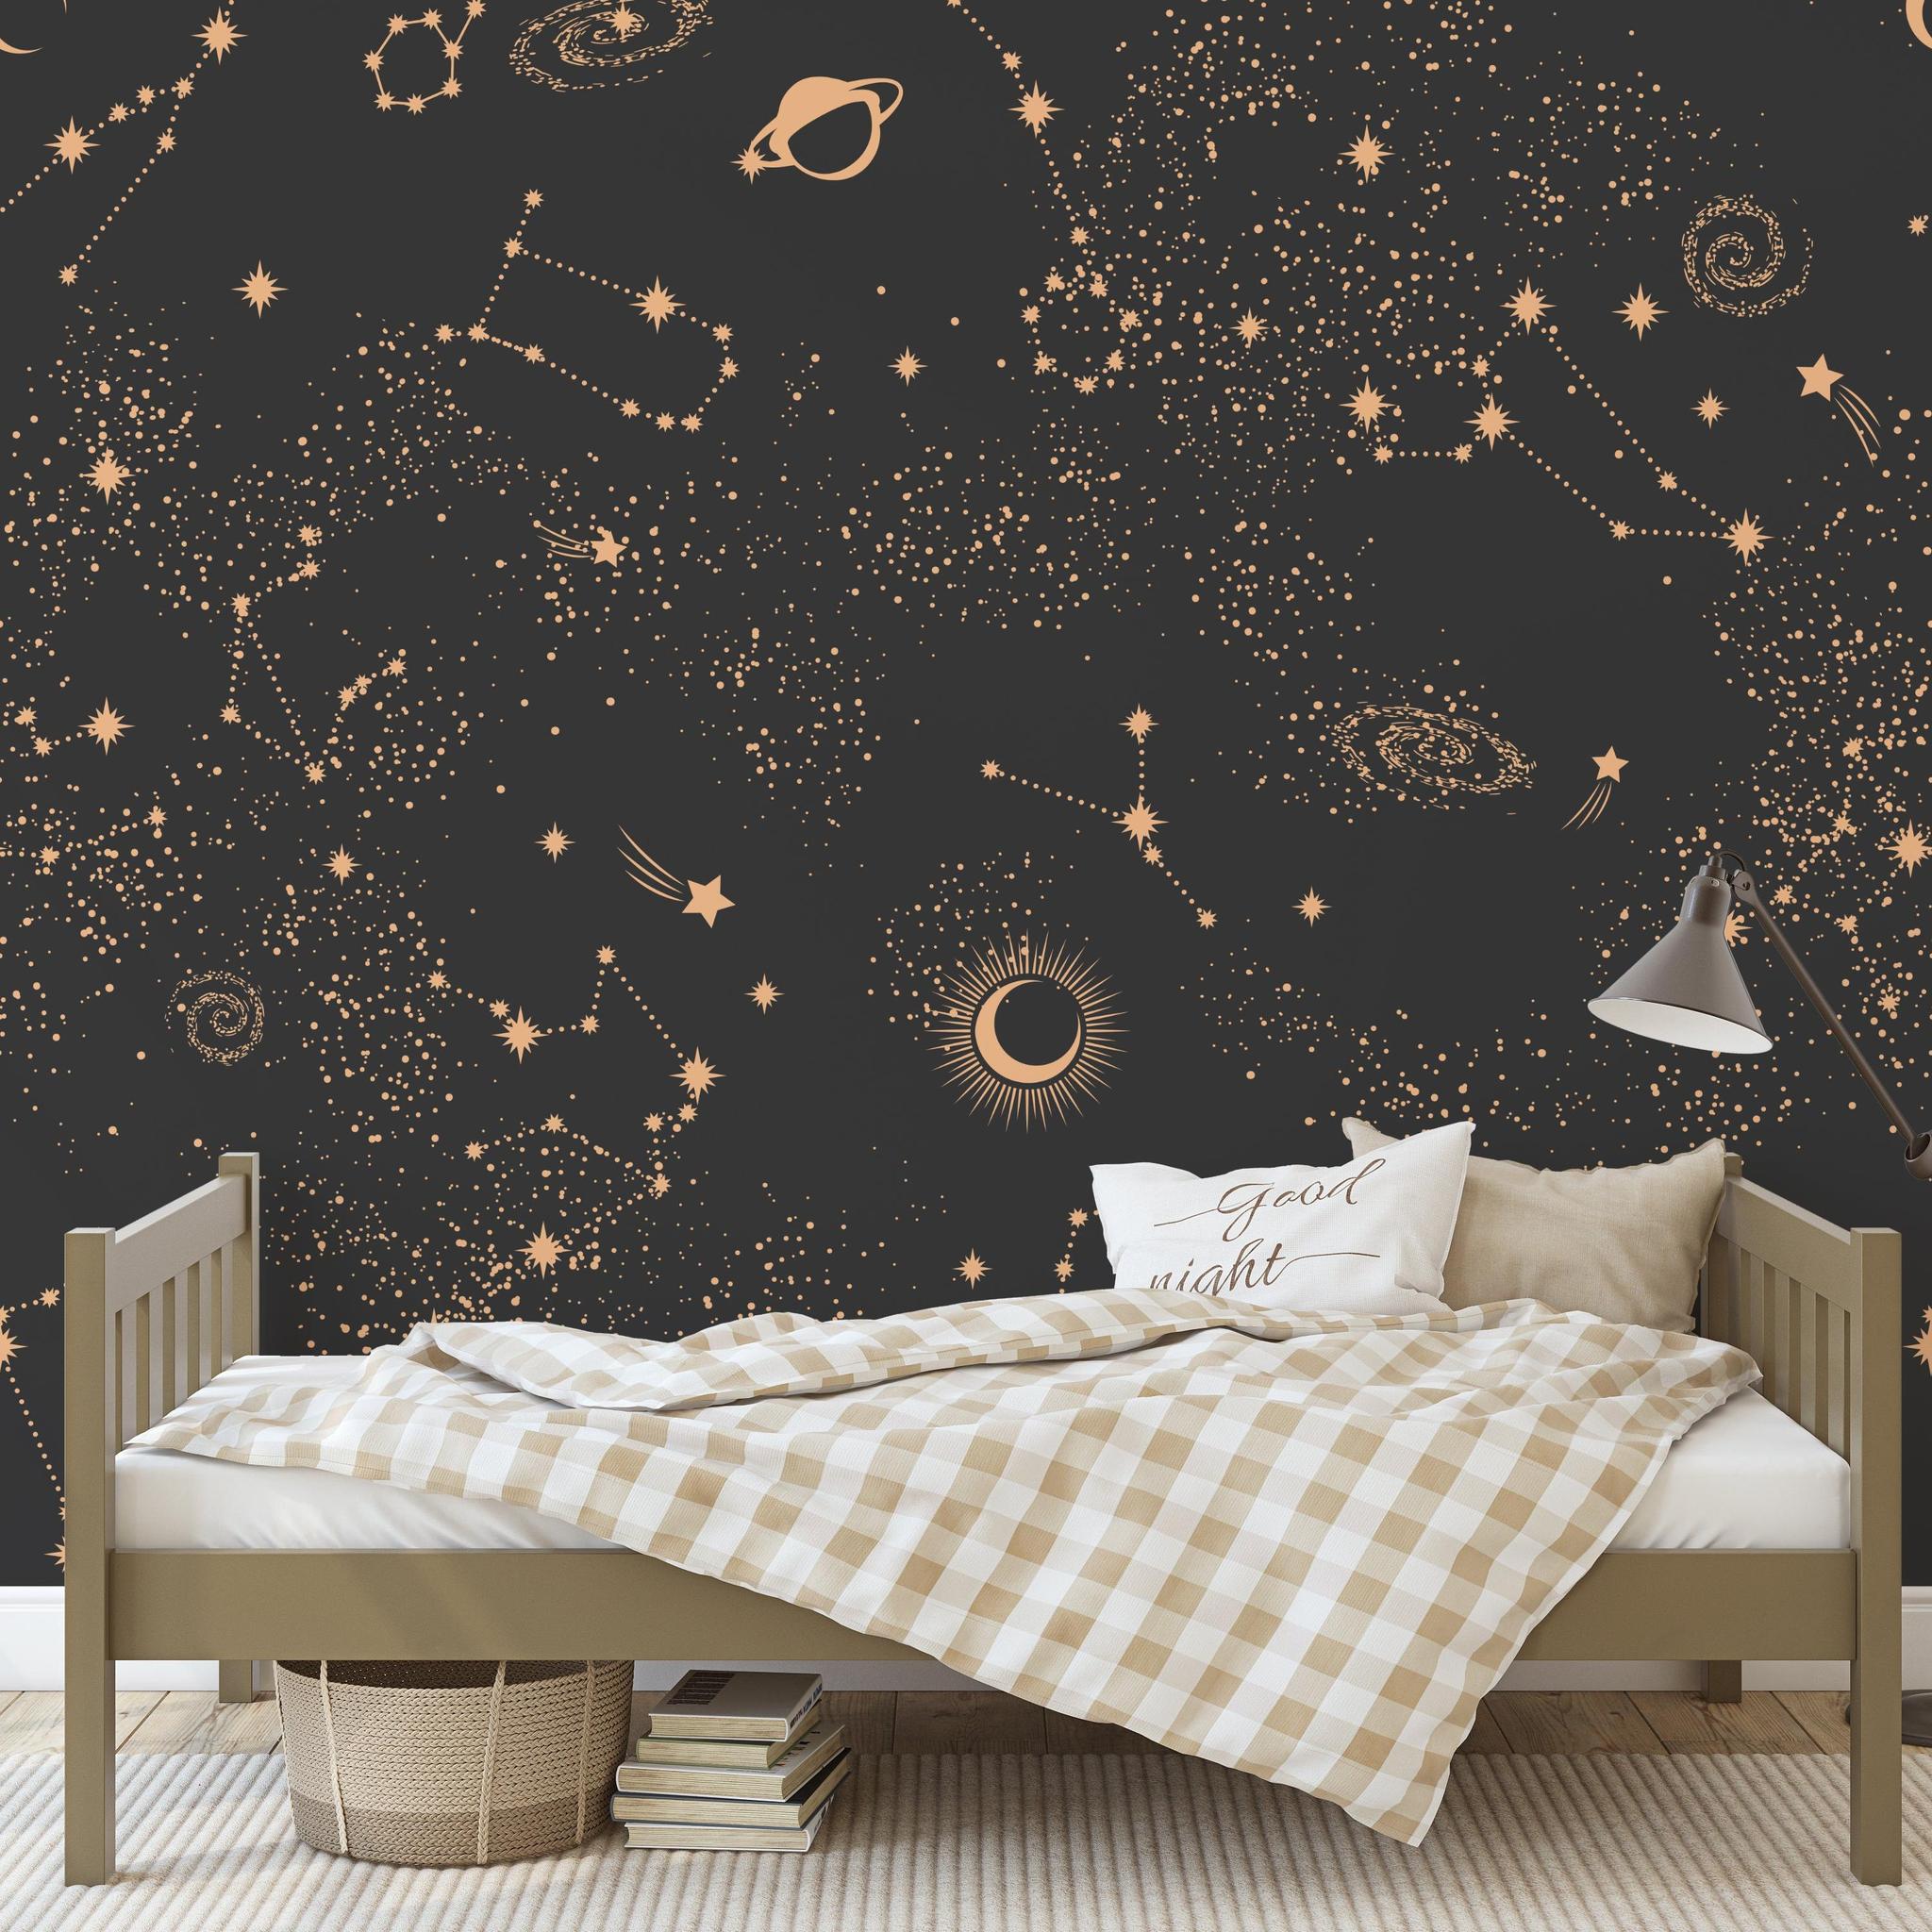 Stunning Milky Way Wallpaper from The Kail Lowry Line in a stylish bedroom, celestial decor focus.
